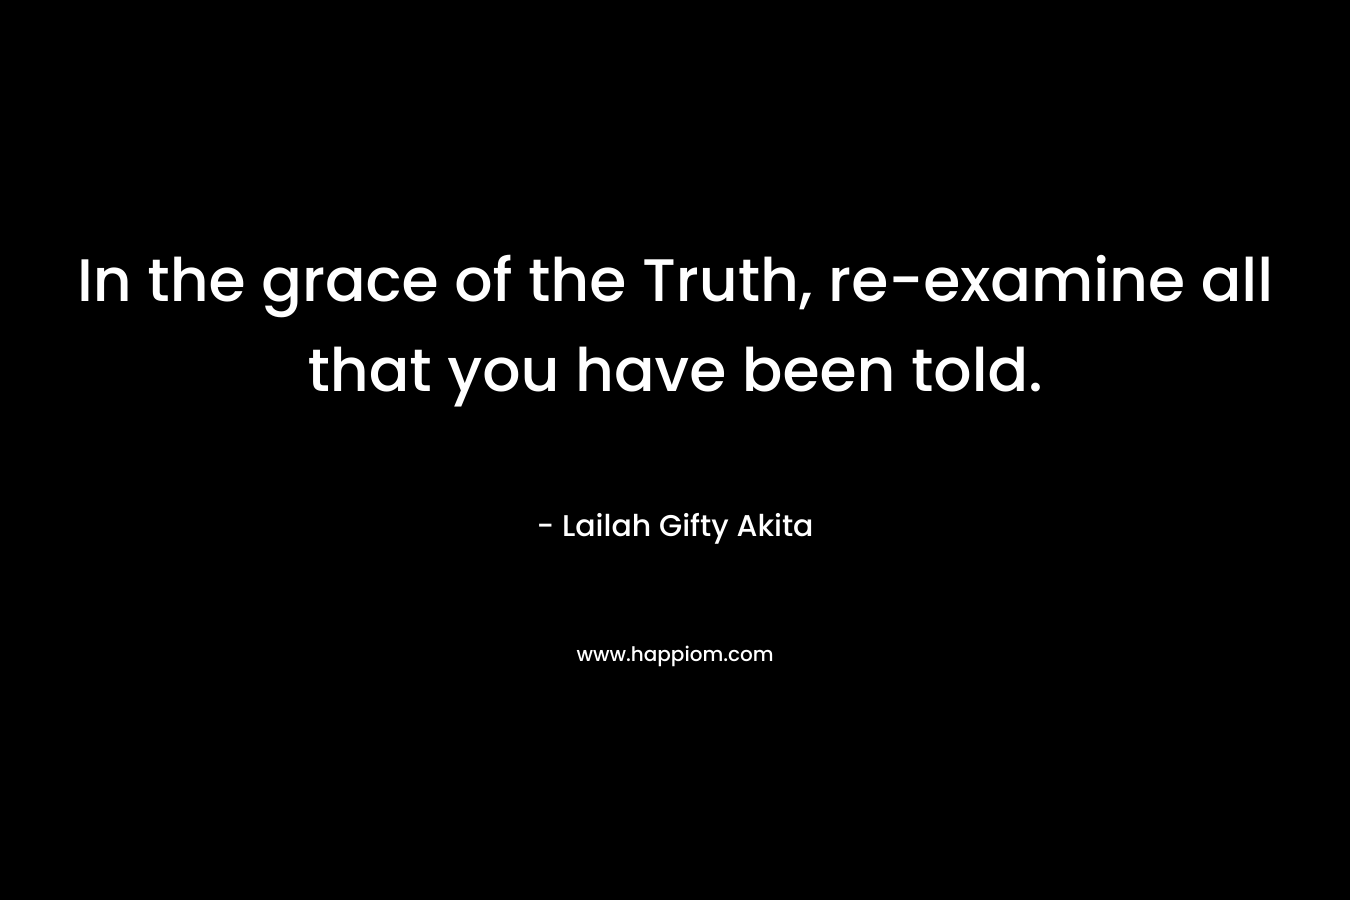 In the grace of the Truth, re-examine all that you have been told.